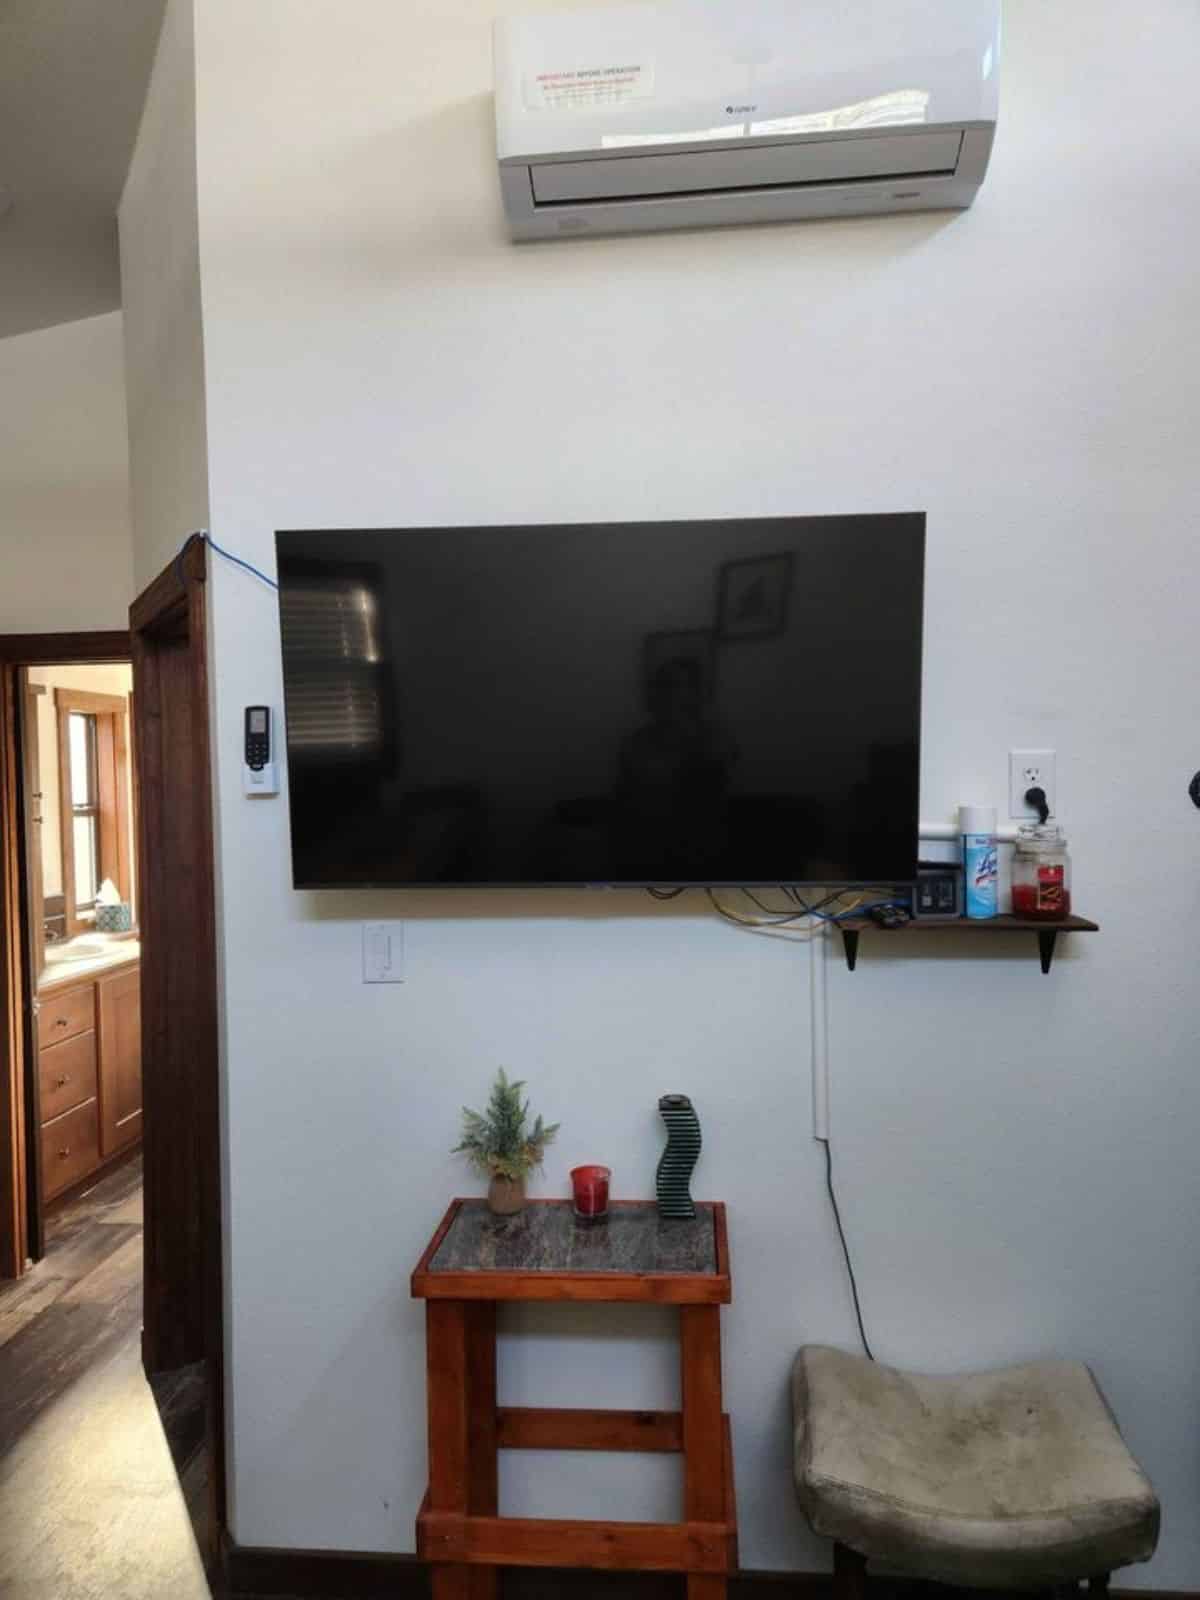 wall mounted TV set with air condition unit in living area of cottage tiny home